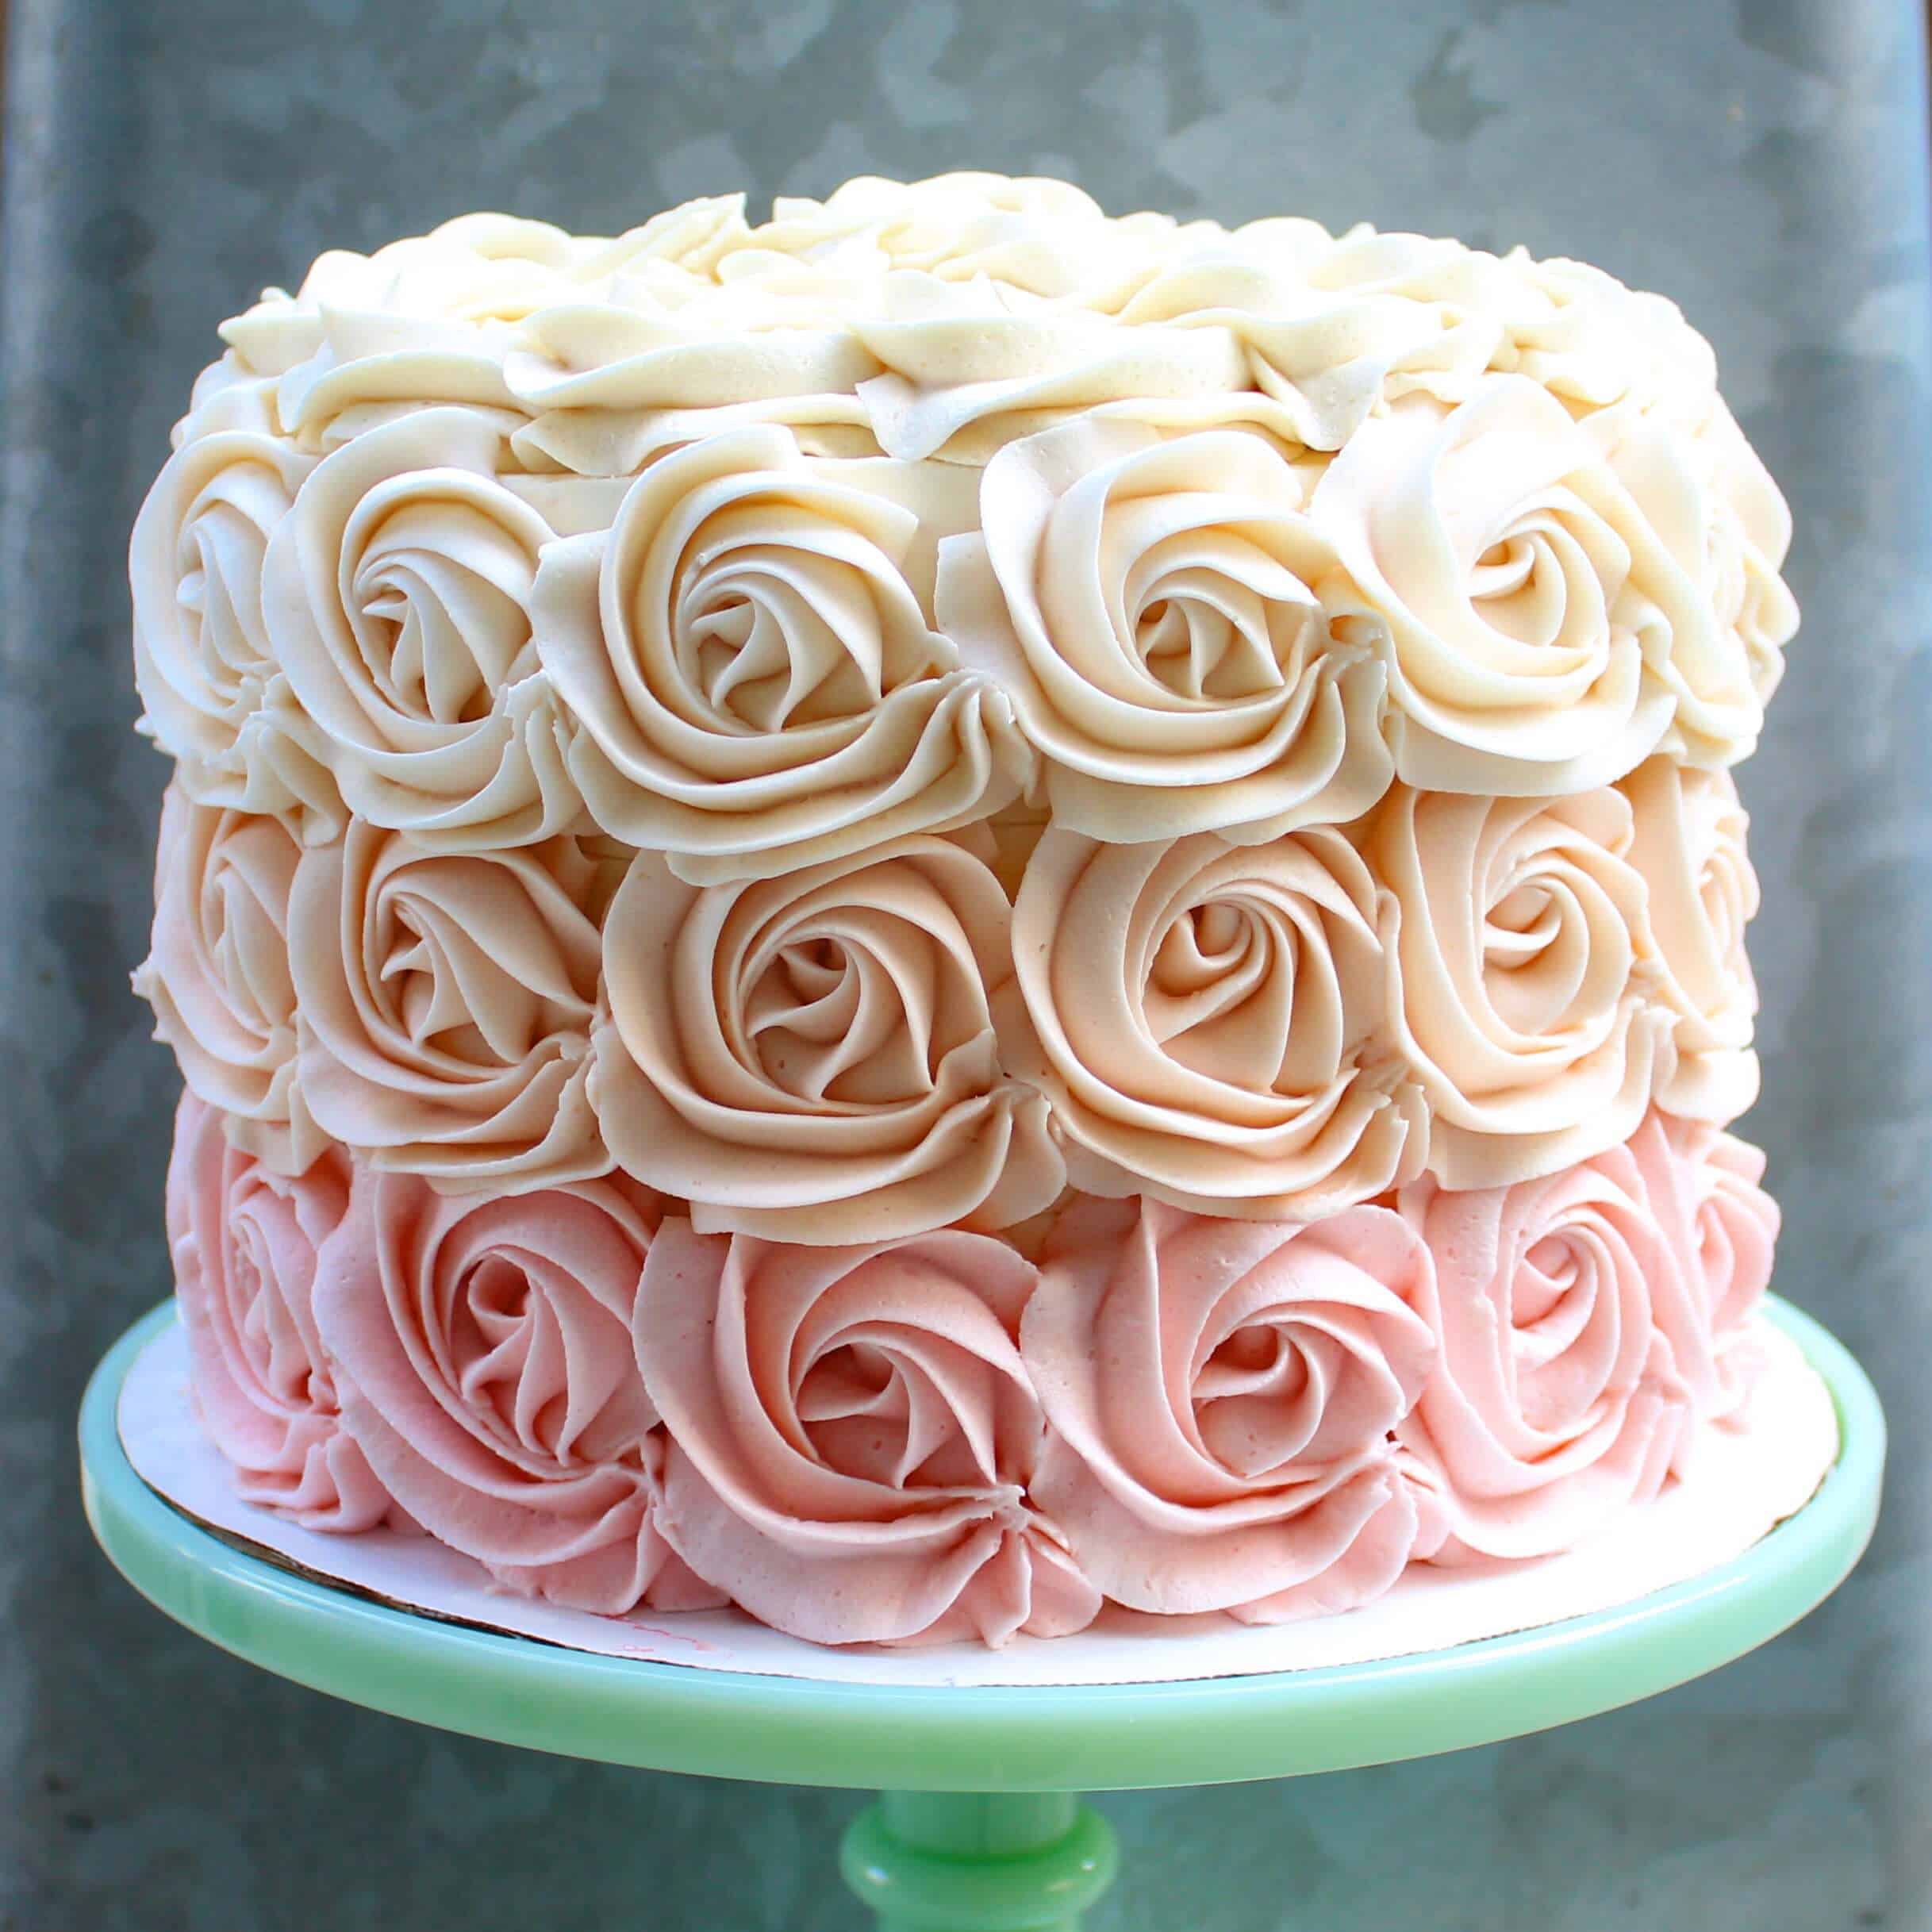 Unveil more than 204 rose cake best